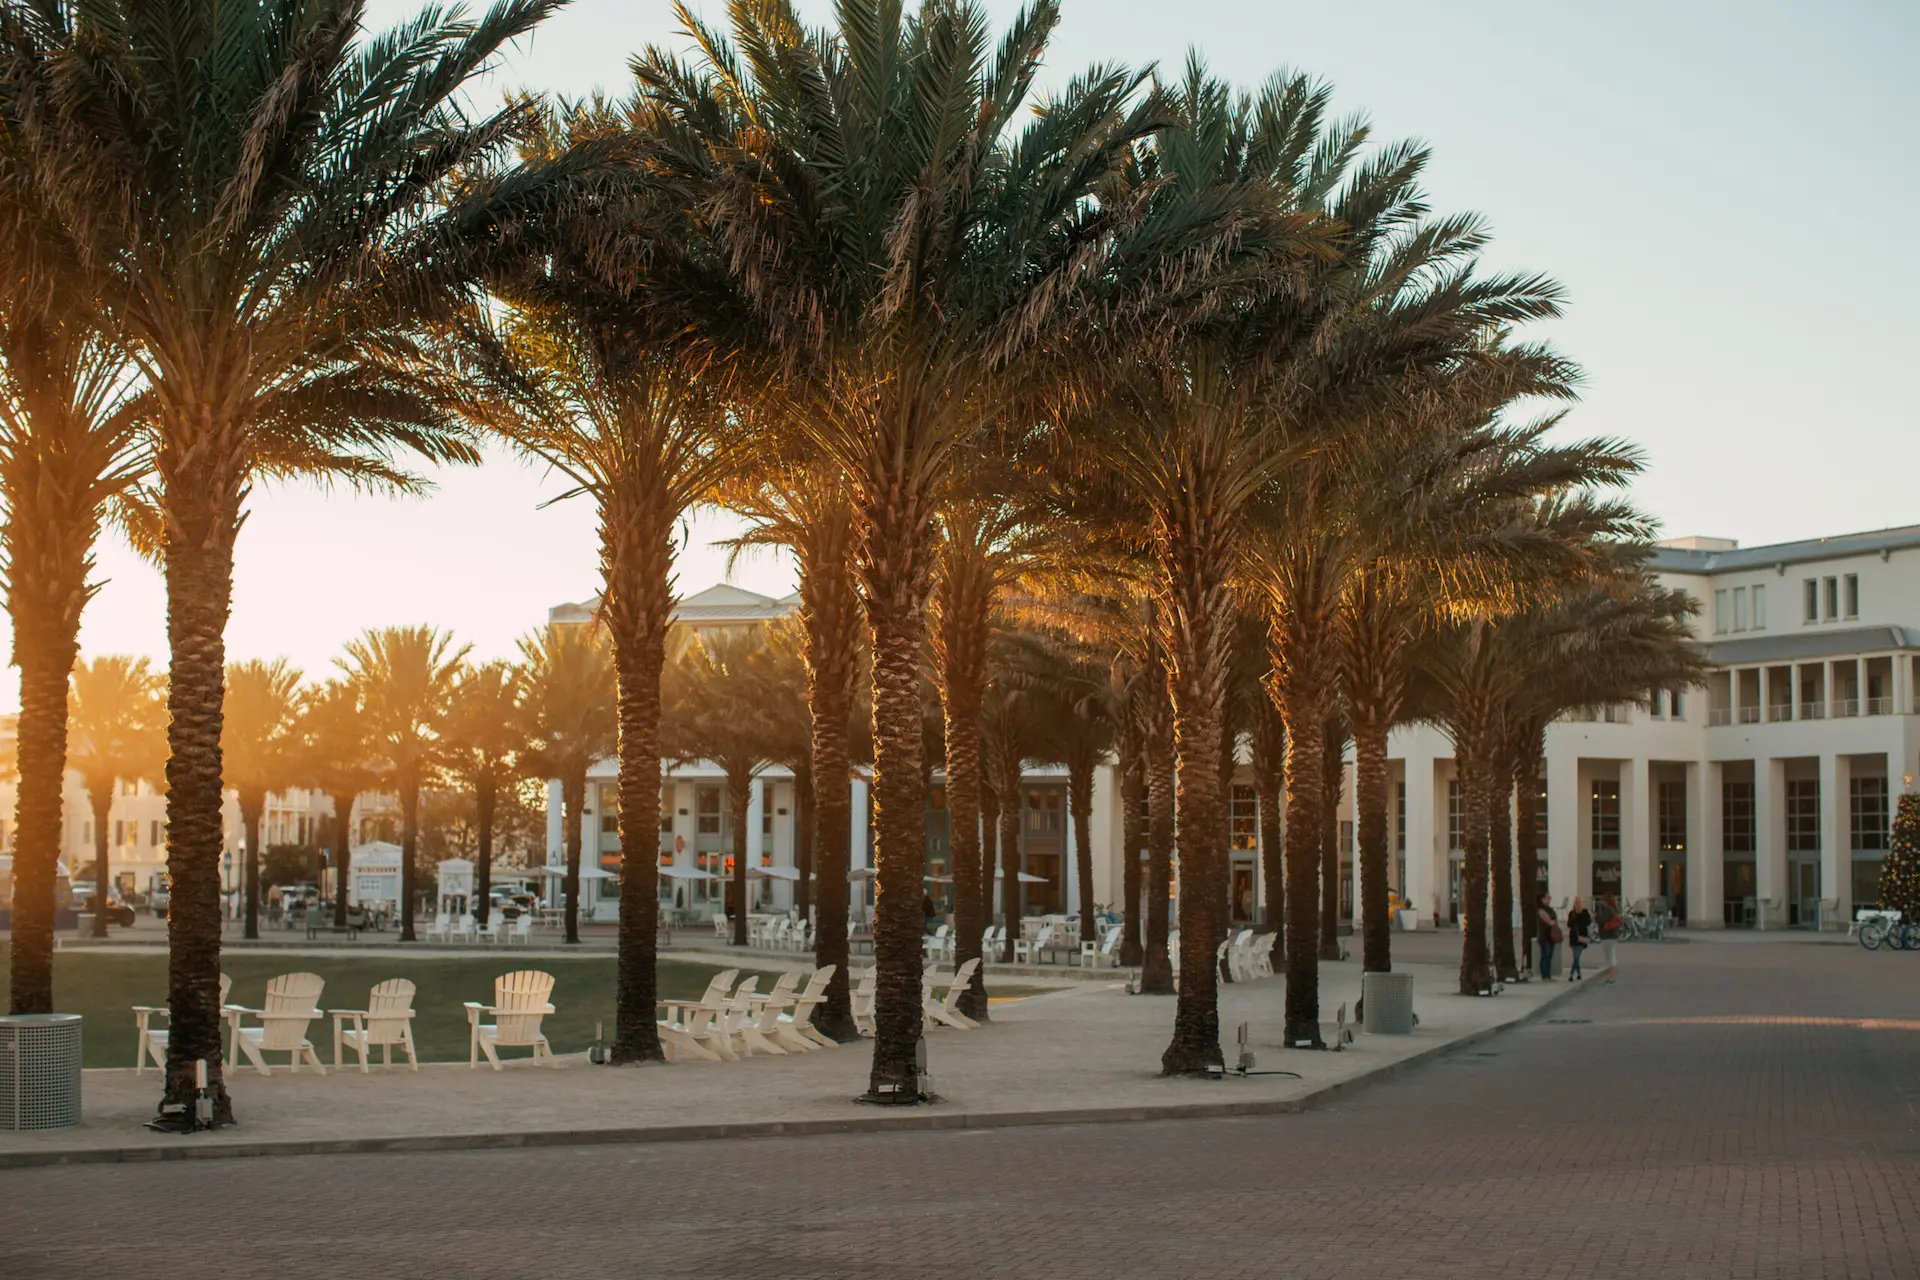 Sunset view of Palm Trees in Seaside Florida